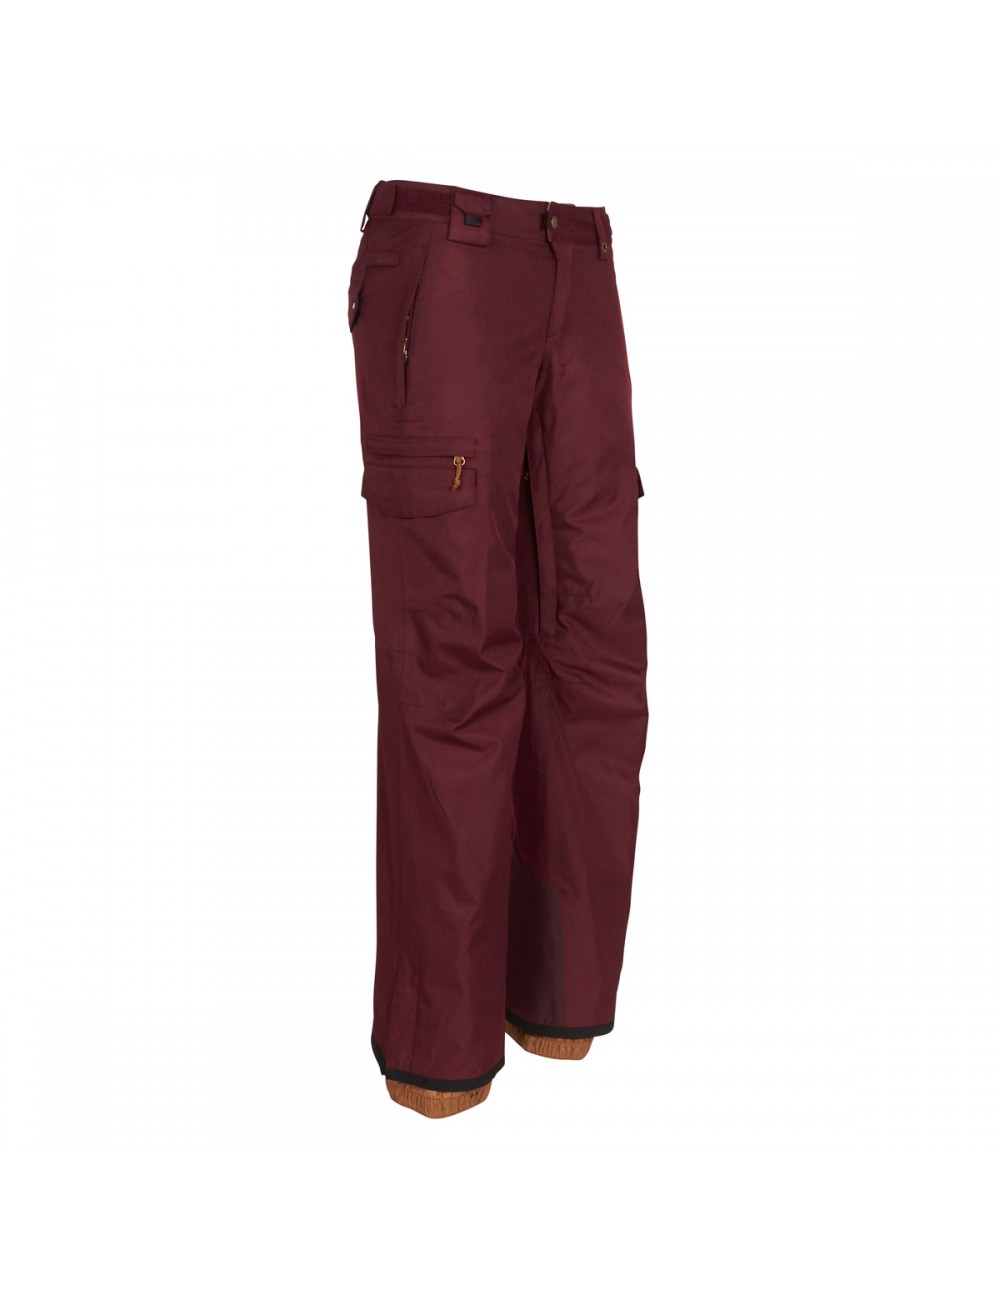 686 Smarty 3-in-1 Cargo Pant - Wine